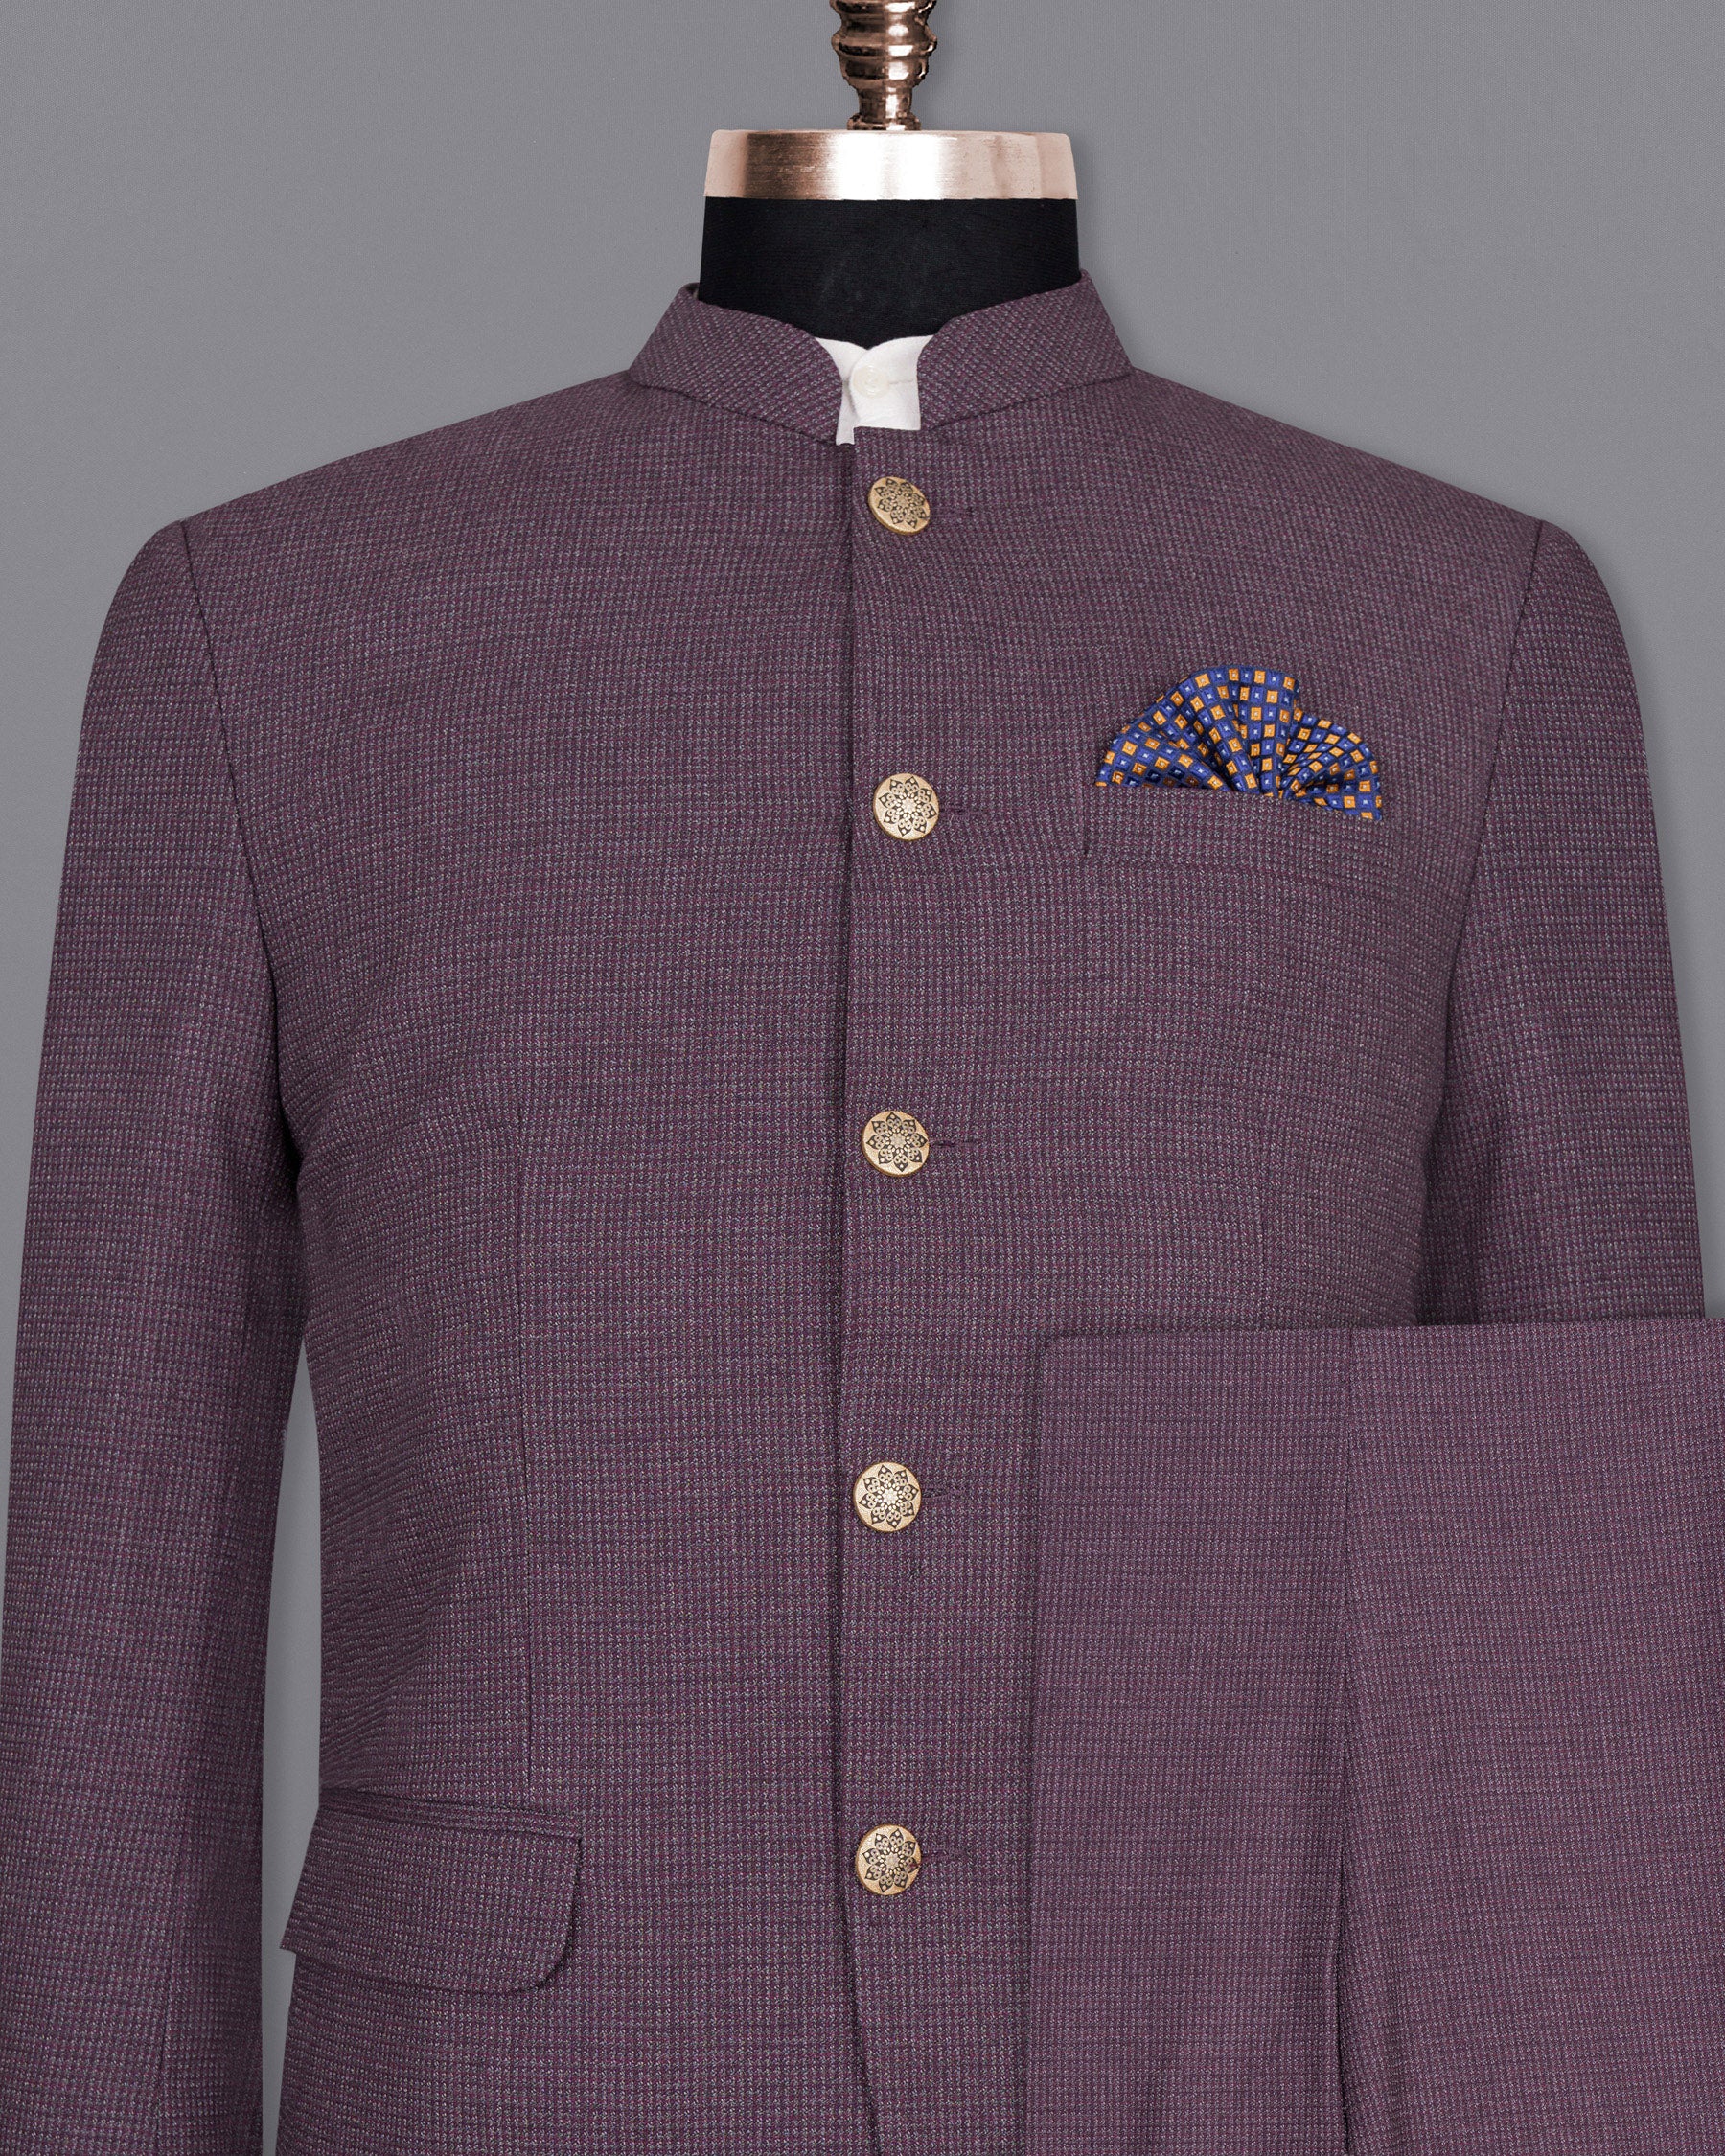 Burgandy with Grey Bandhgala Woolrich Suit ST1432-BG-36,ST1432-BG-38,ST1432-BG-40,ST1432-BG-42,ST1432-BG-44,ST1432-BG-46,ST1432-BG-48,ST1432-BG-50,ST1432-BG-52,ST1432-BG-54,ST1432-BG-56,ST1432-BG-58,ST1432-BG-60